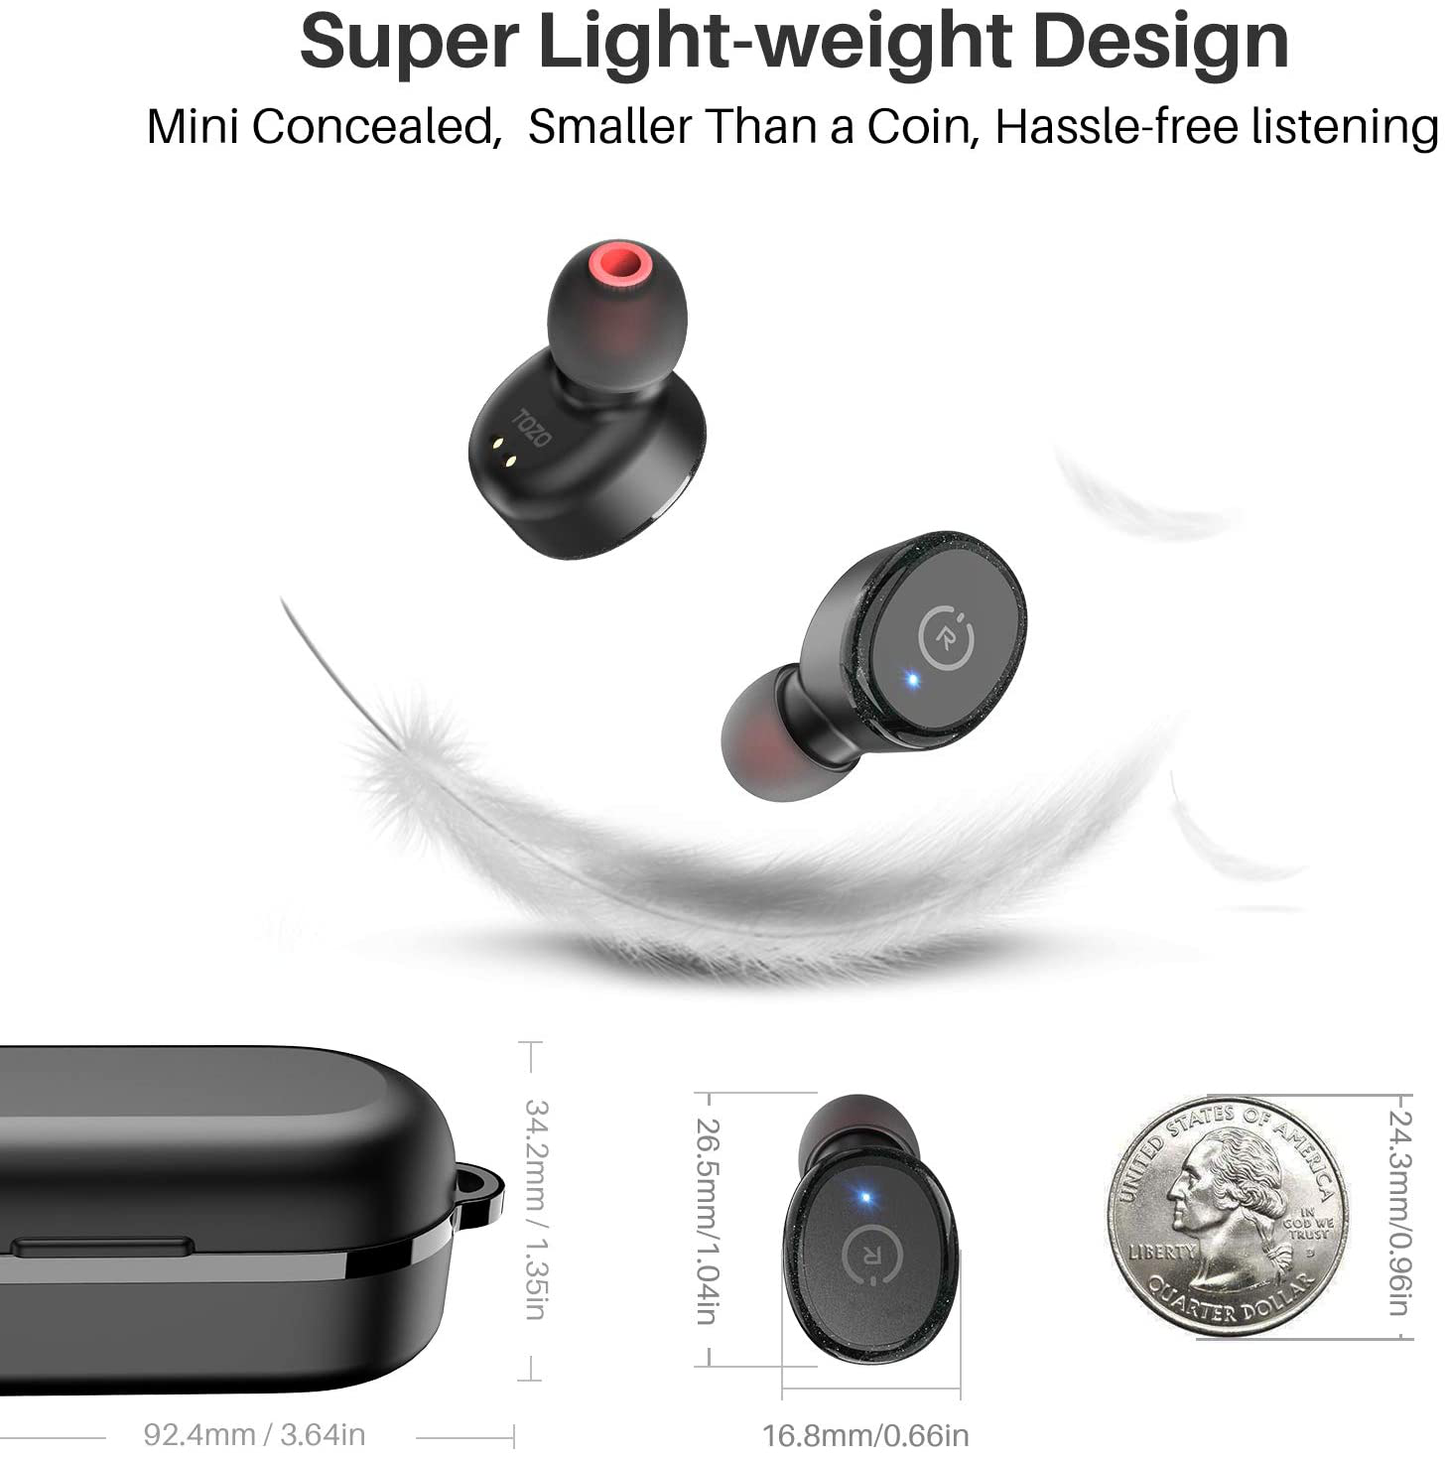 TOZO T10 Bluetooth 5.0 Wireless Earbuds with Wireless Charging Case IPX8 Waterproof Stereo Headphones in Ear Built in Mic Headset Premium Sound with Deep Bass for Sport